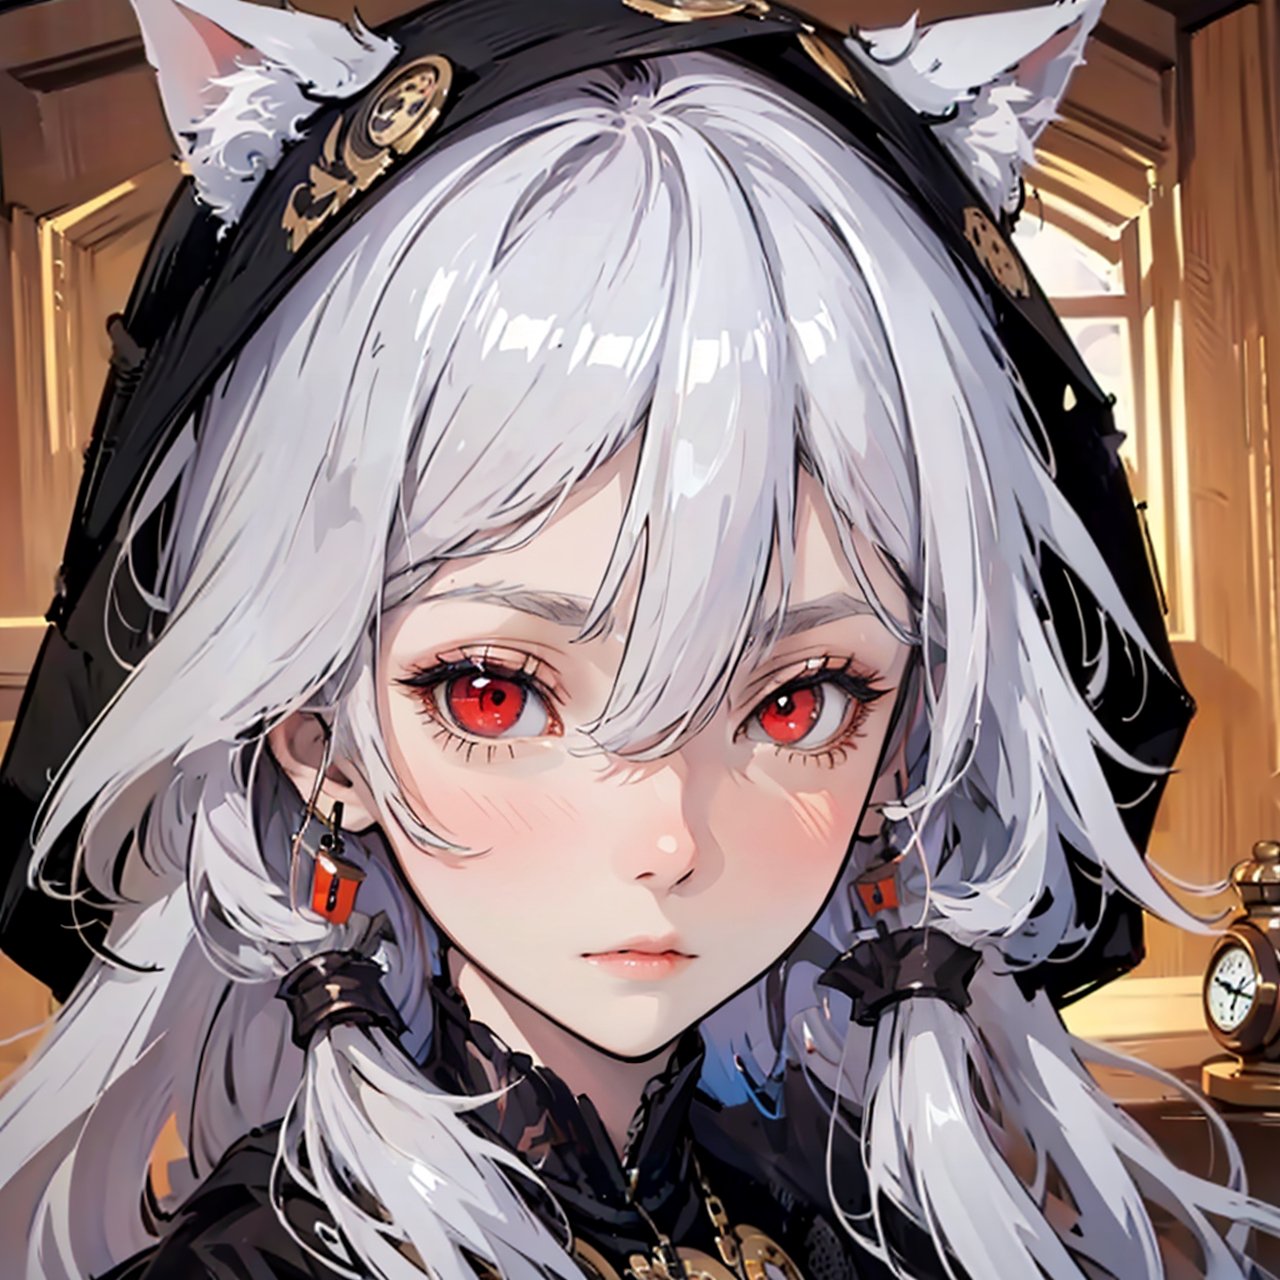 In a softly lit bedroom, a captivating girl with red eyes and pale skin wears an adorable hood with cat ears. Her detailed and enigmatic eyes contrast with her vacant expression. She holds a pocket watch, creating an intriguing scene.